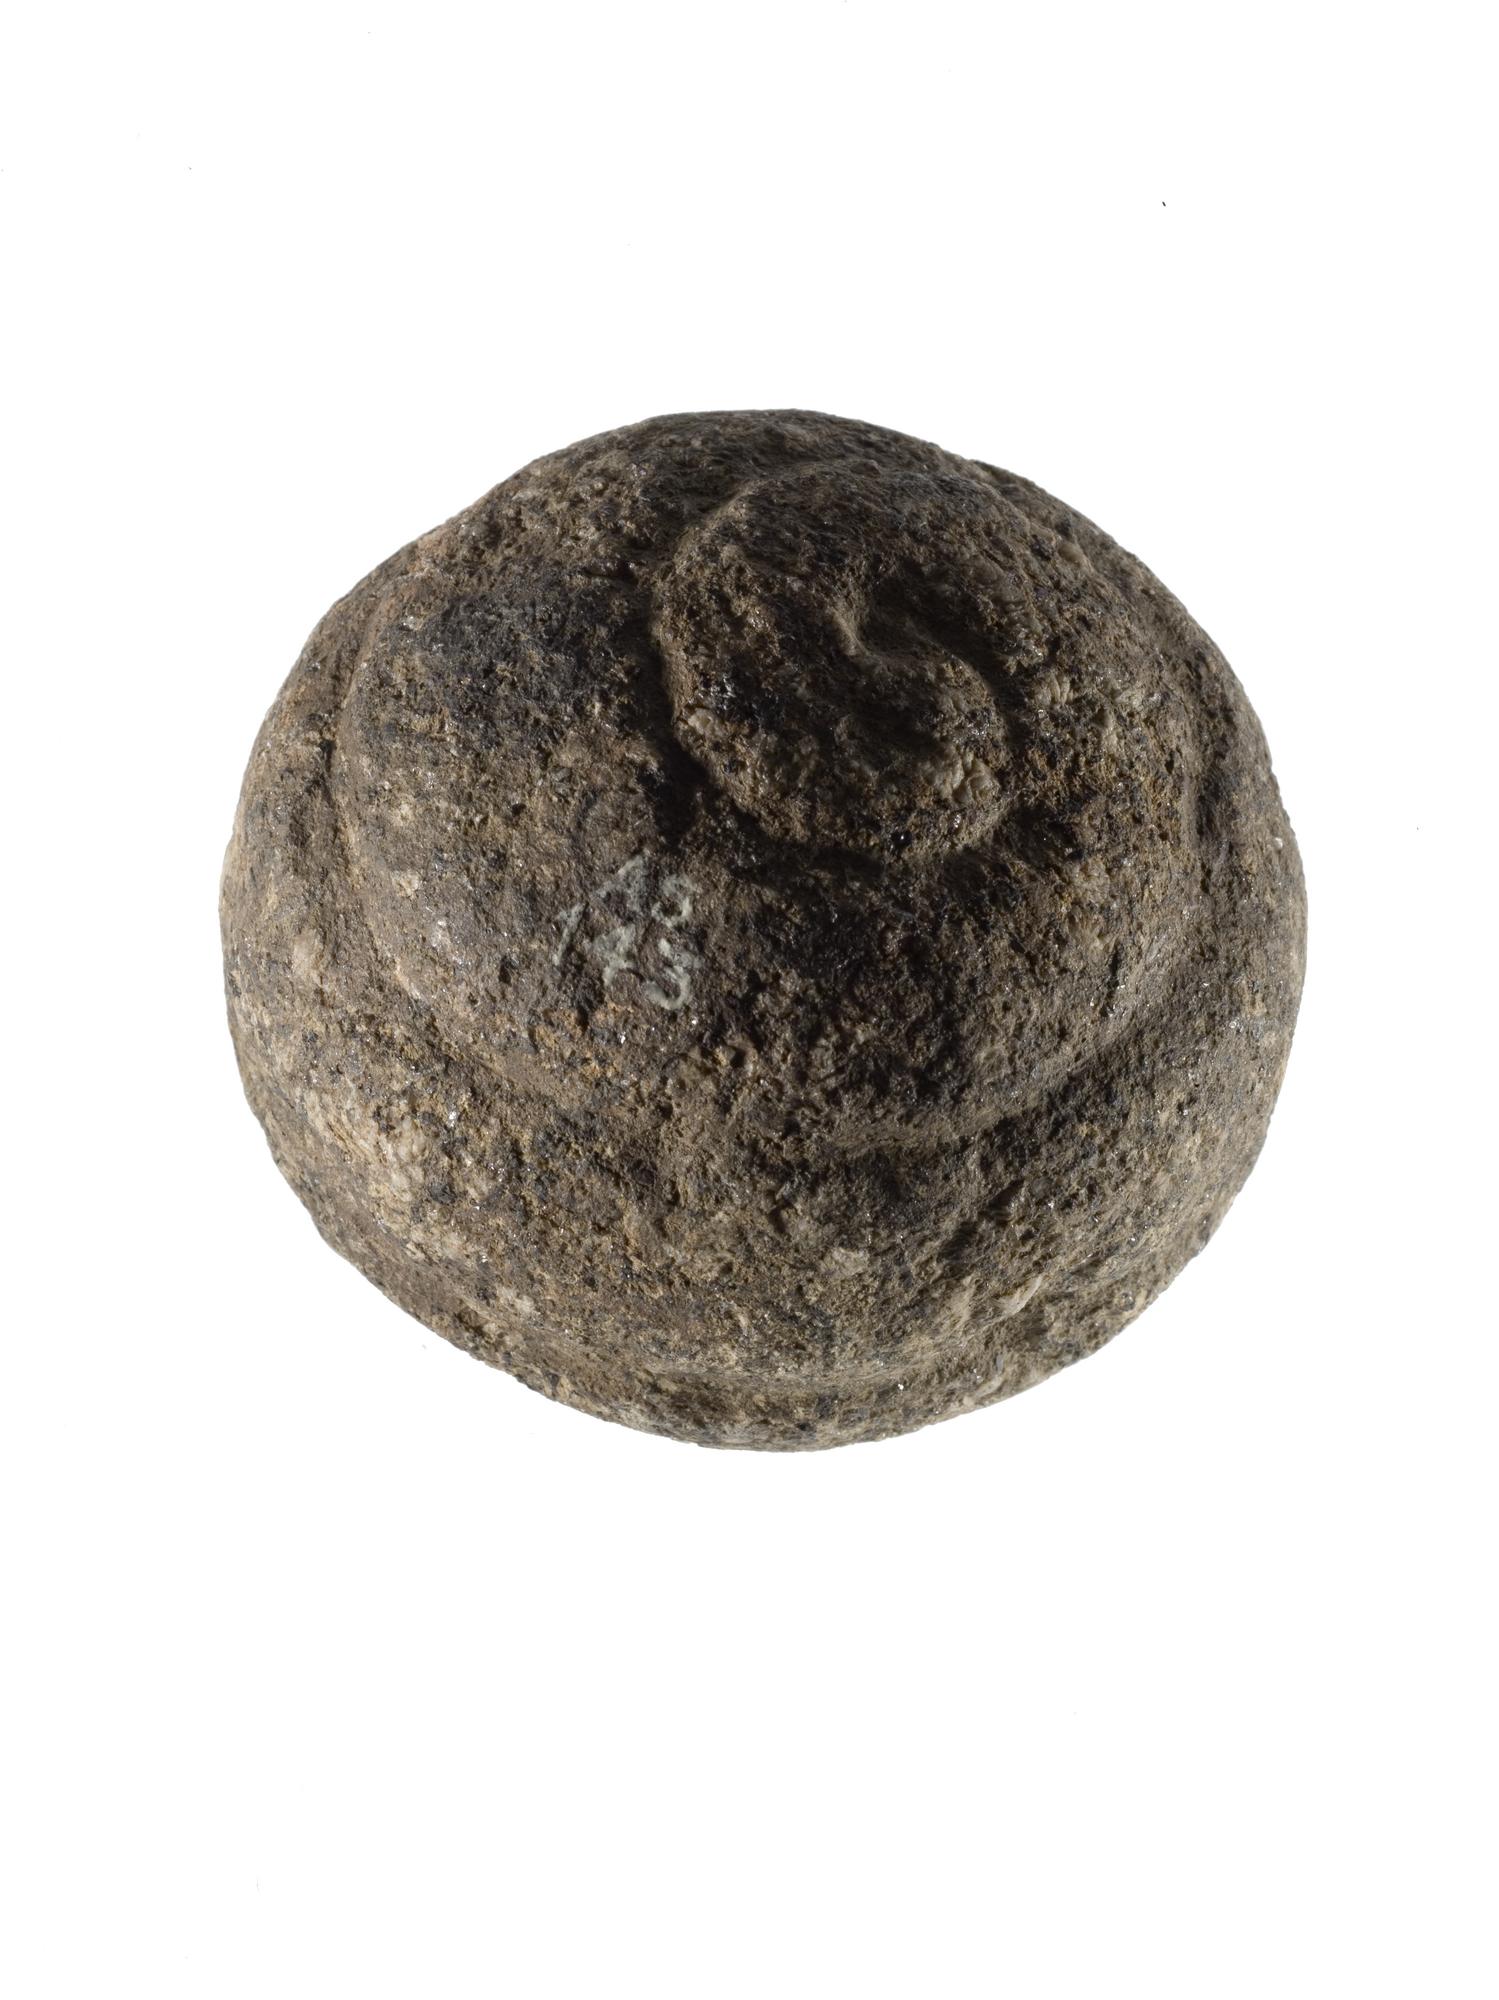 Carved stone ball with spiral ornament, from Buchan, Aberdeenshire, around 3000 BC.